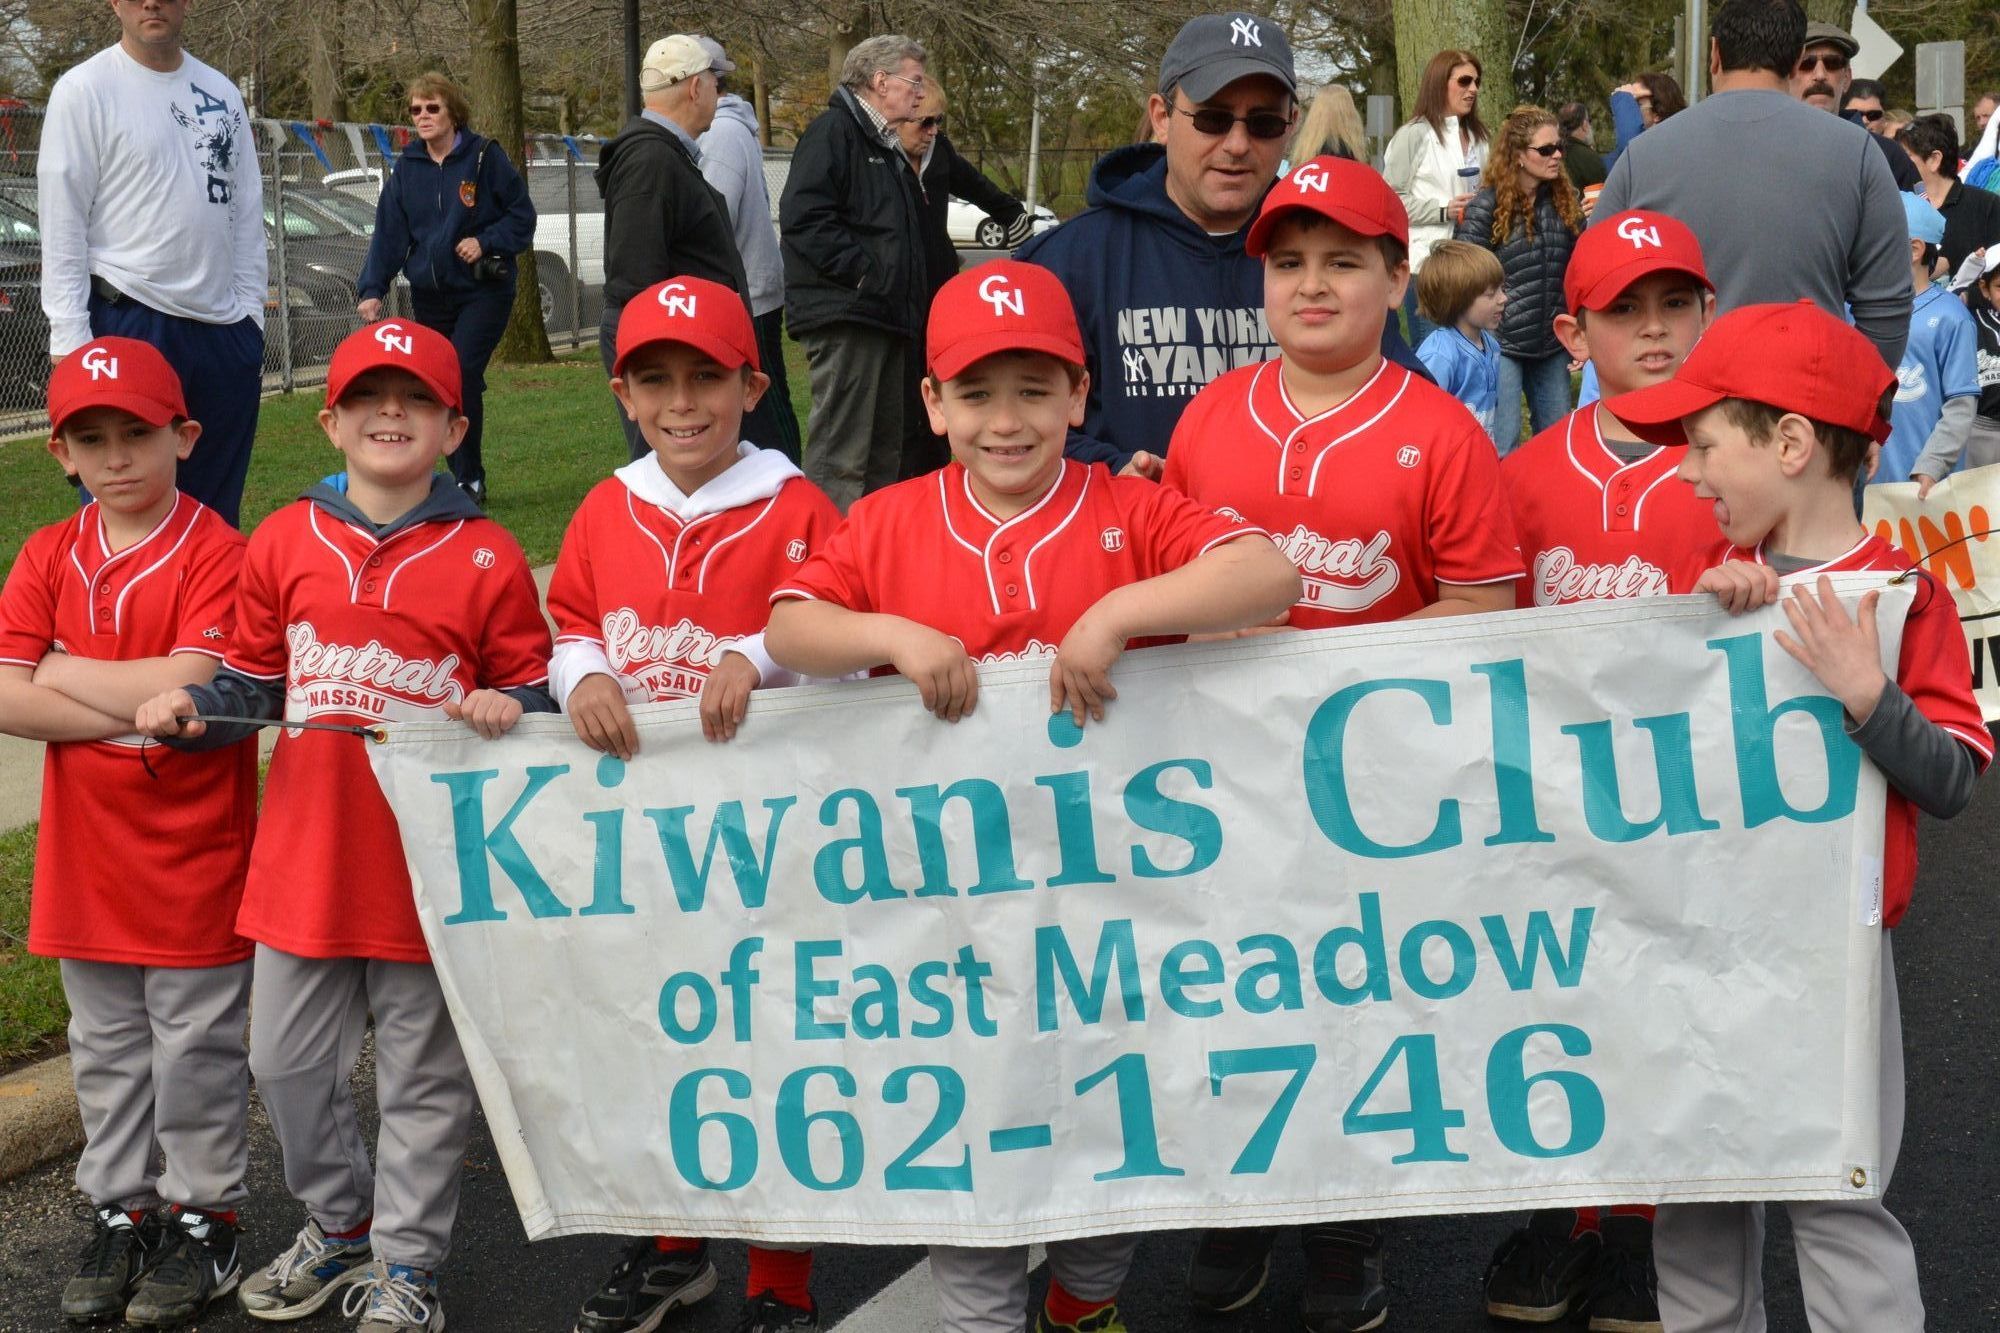 These excited marchers were sponsored by the East Meadow Kiwanis Club.